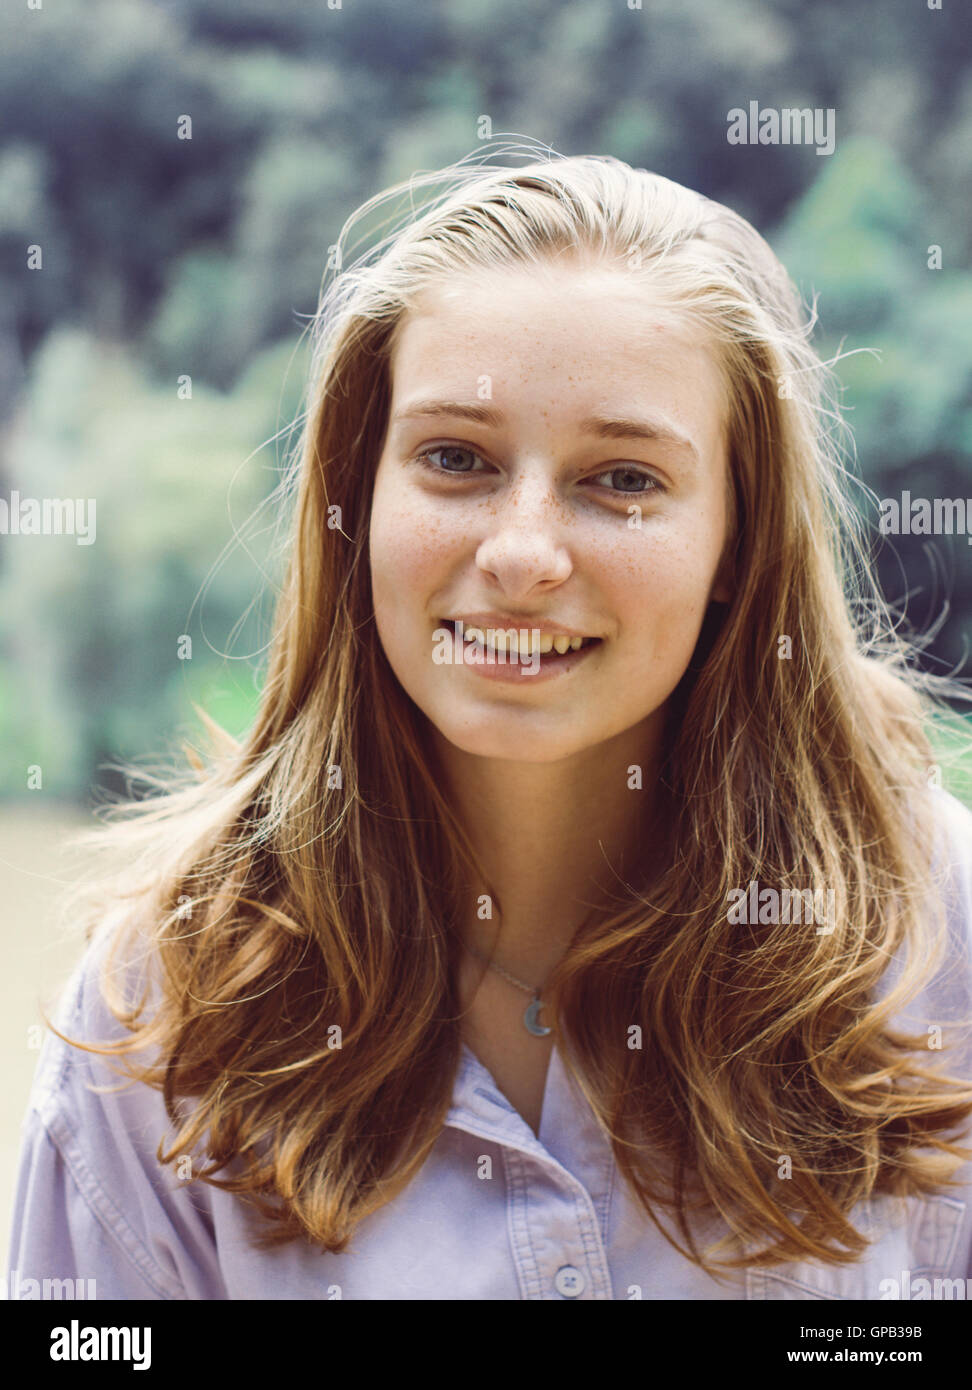 Cute teenage girl portrait with blond hair smiles Stock Photo